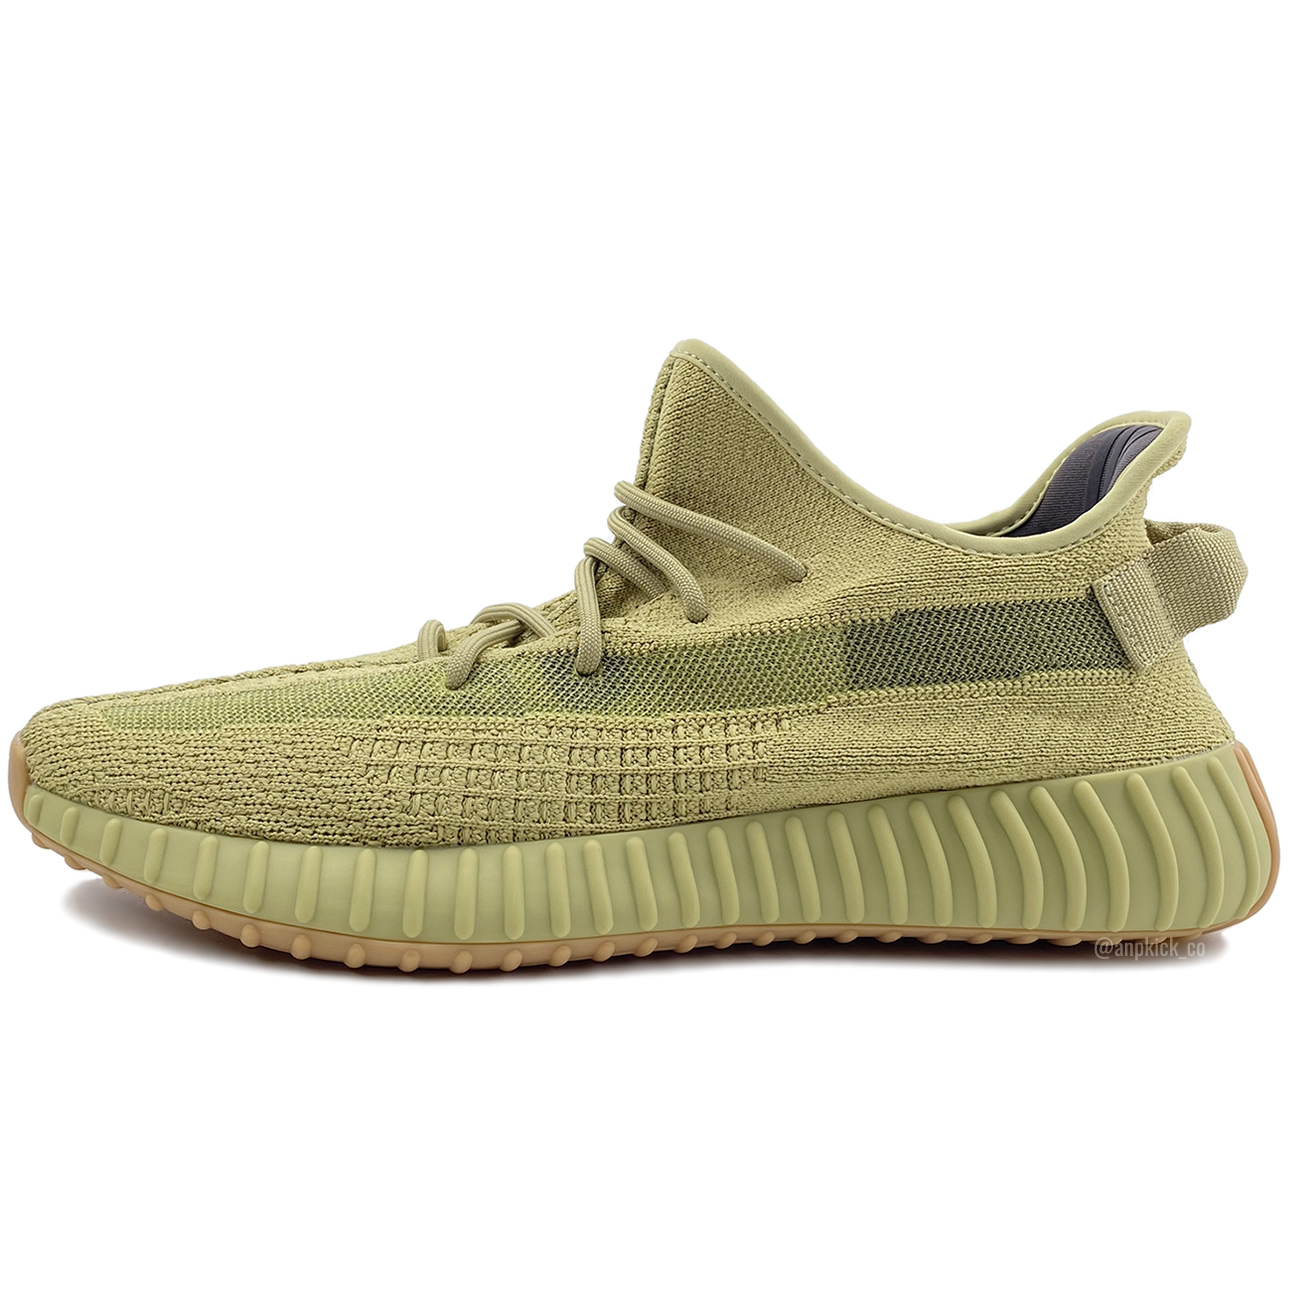 Adidas Yeezy Boost 350 V2 Sulfur Fy5346 First Preview Release Date (1) - newkick.org